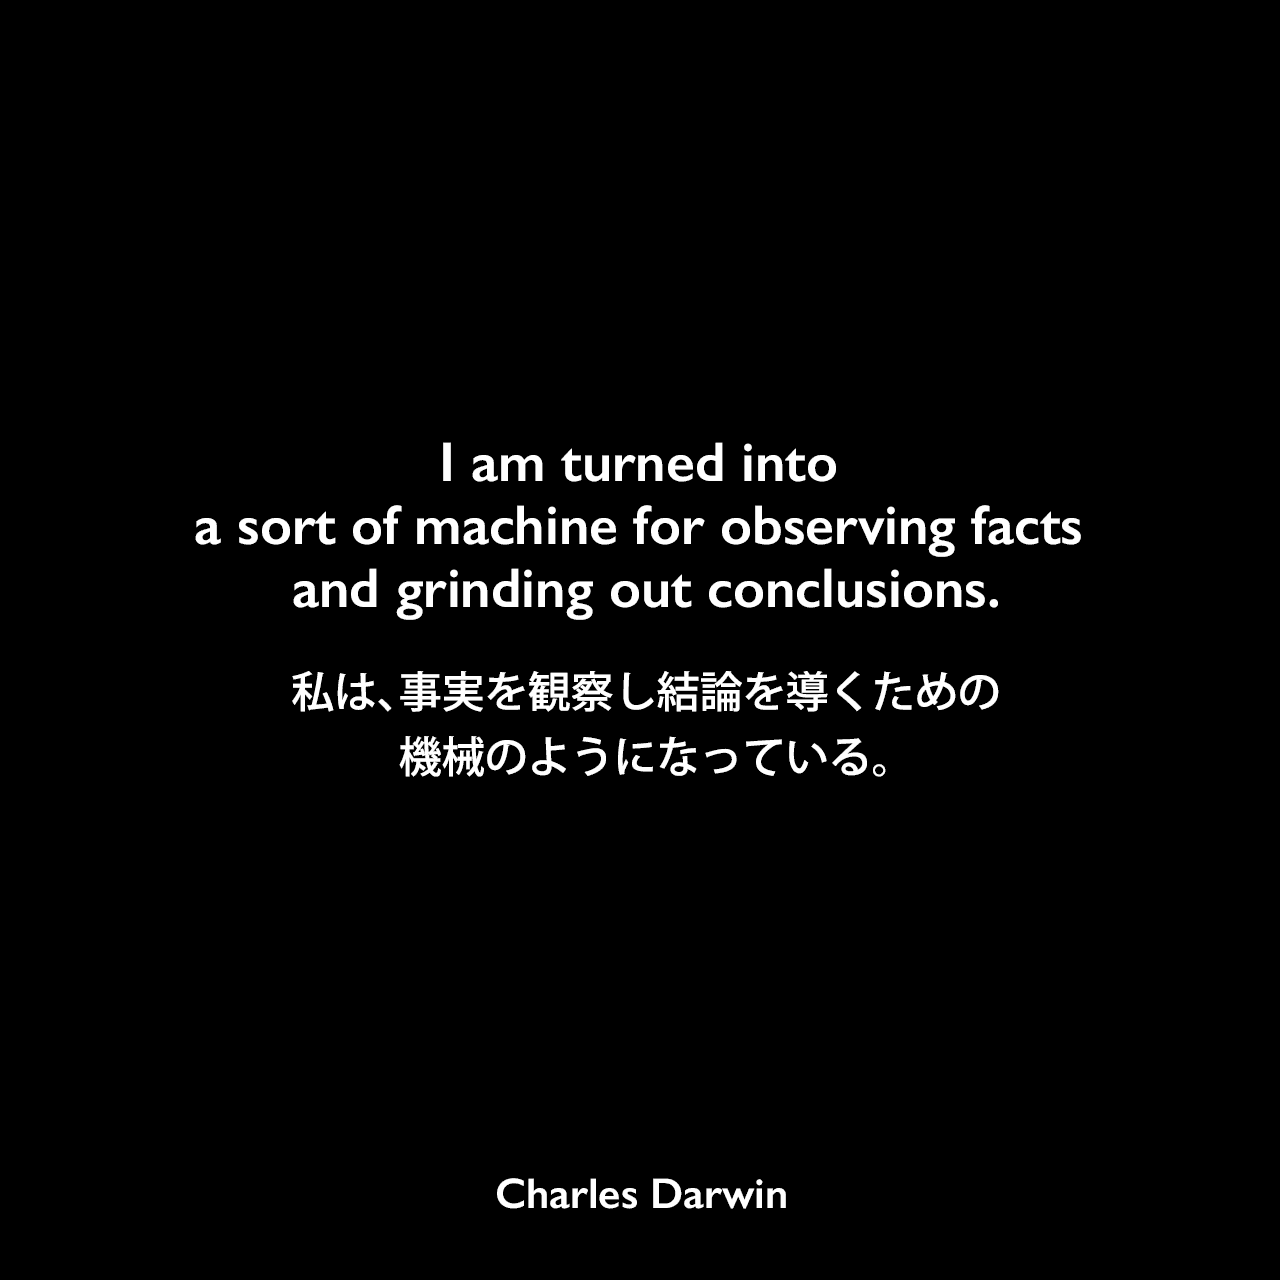 I am turned into a sort of machine for observing facts and grinding out conclusions.私は、事実を観察し結論を導くための機械のようになっている。Charles Darwin